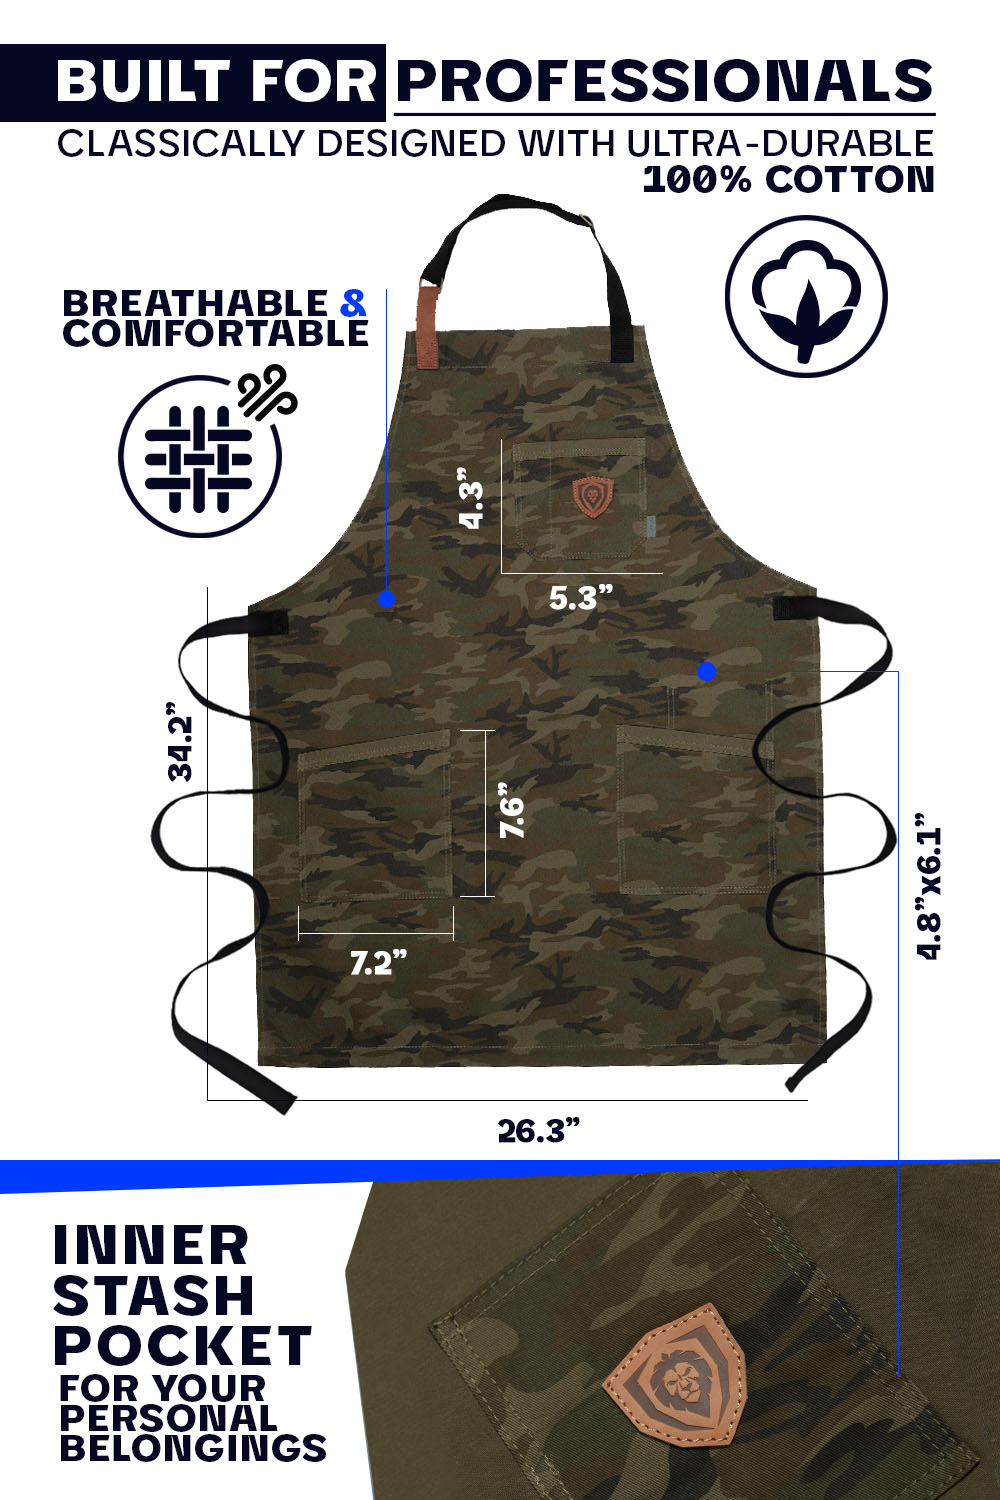 Dalstrong the kitchen rambo professional chef's kitchen apron specification.